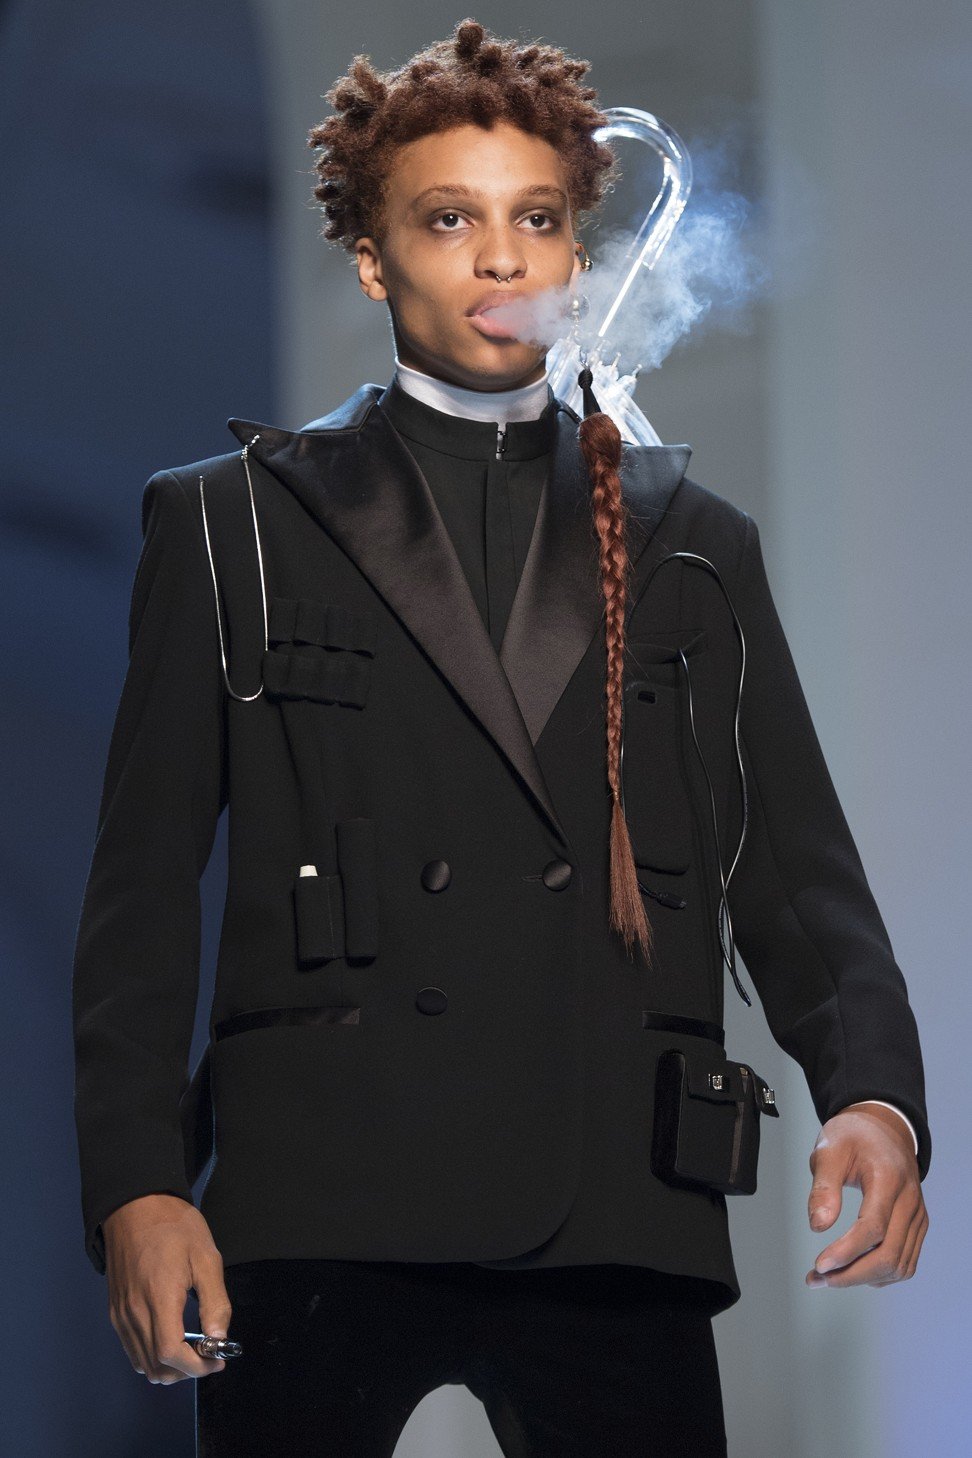 A model presents an avant-garde black outfit paired with a shisha as accessory. Photo: EPA